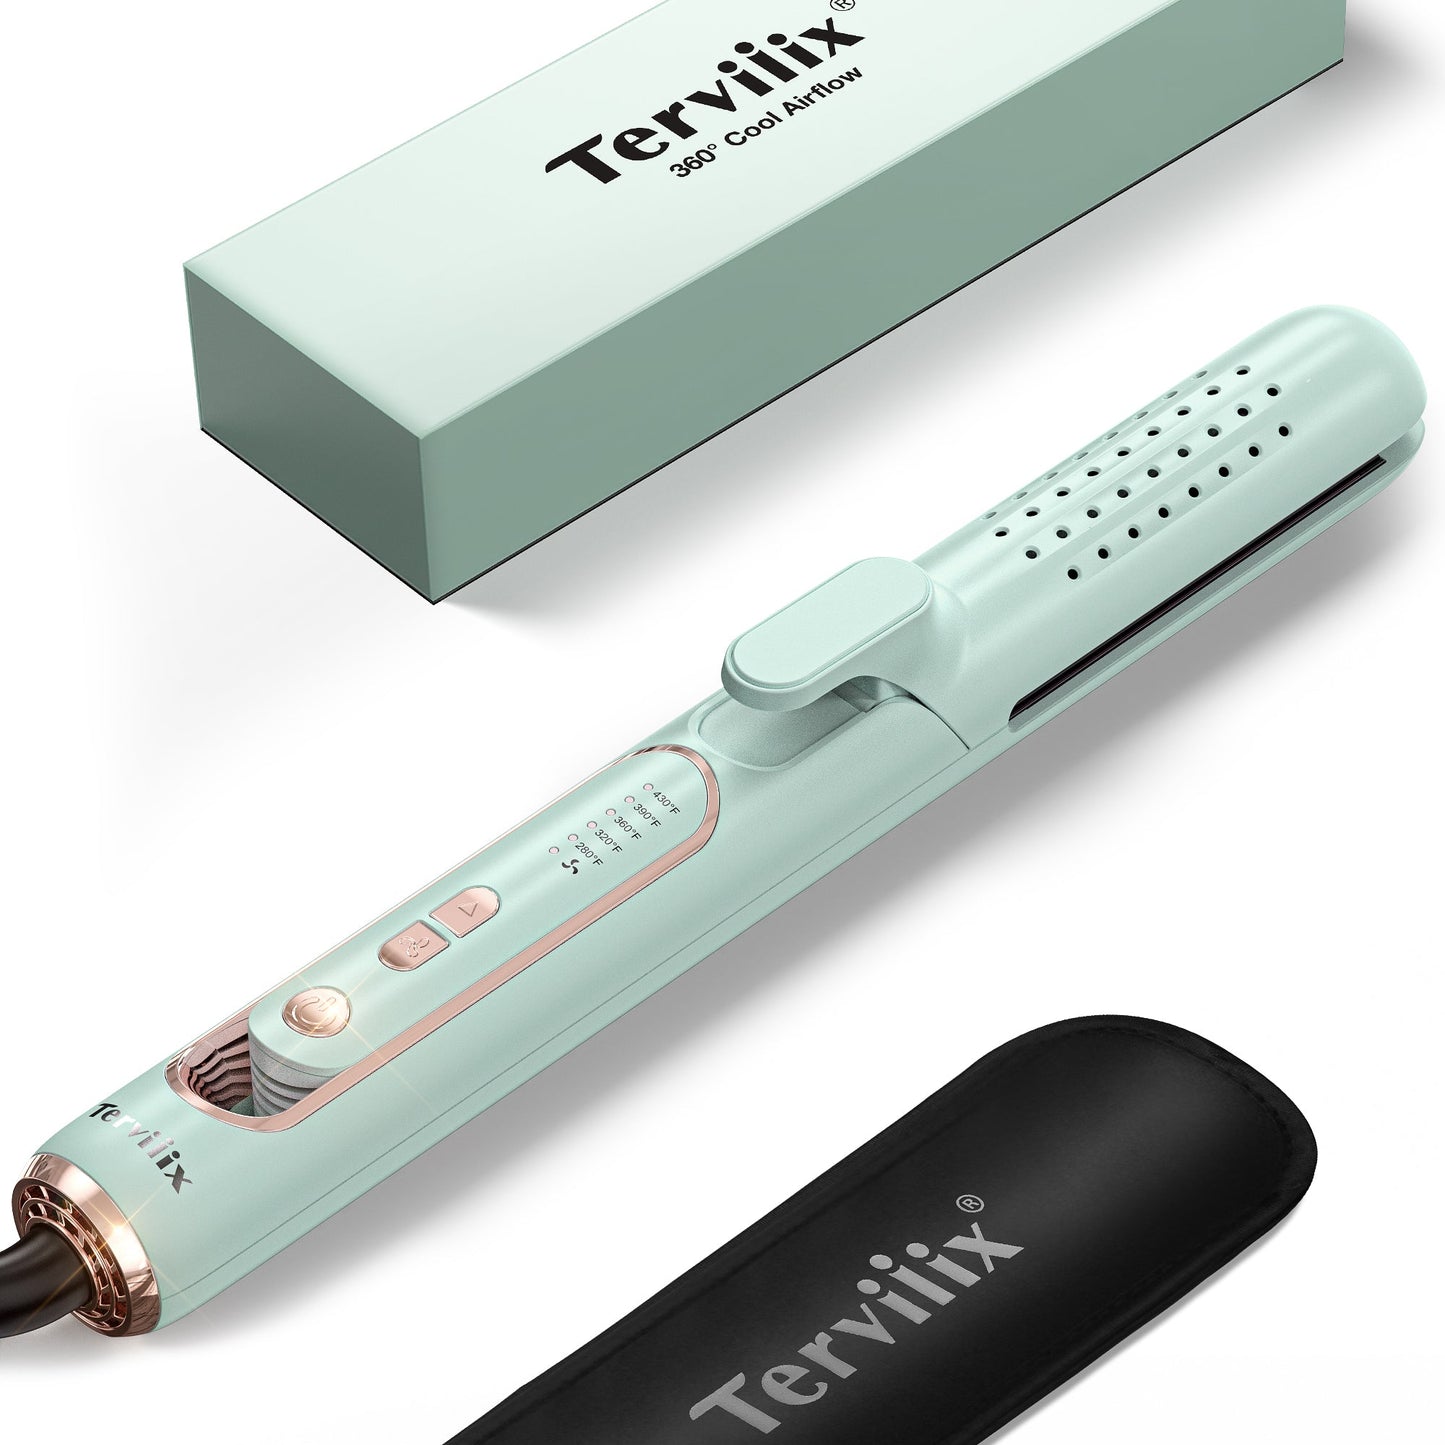 Terviiix Airflow Styler Hair 360° Cooling Air Vents, Pink